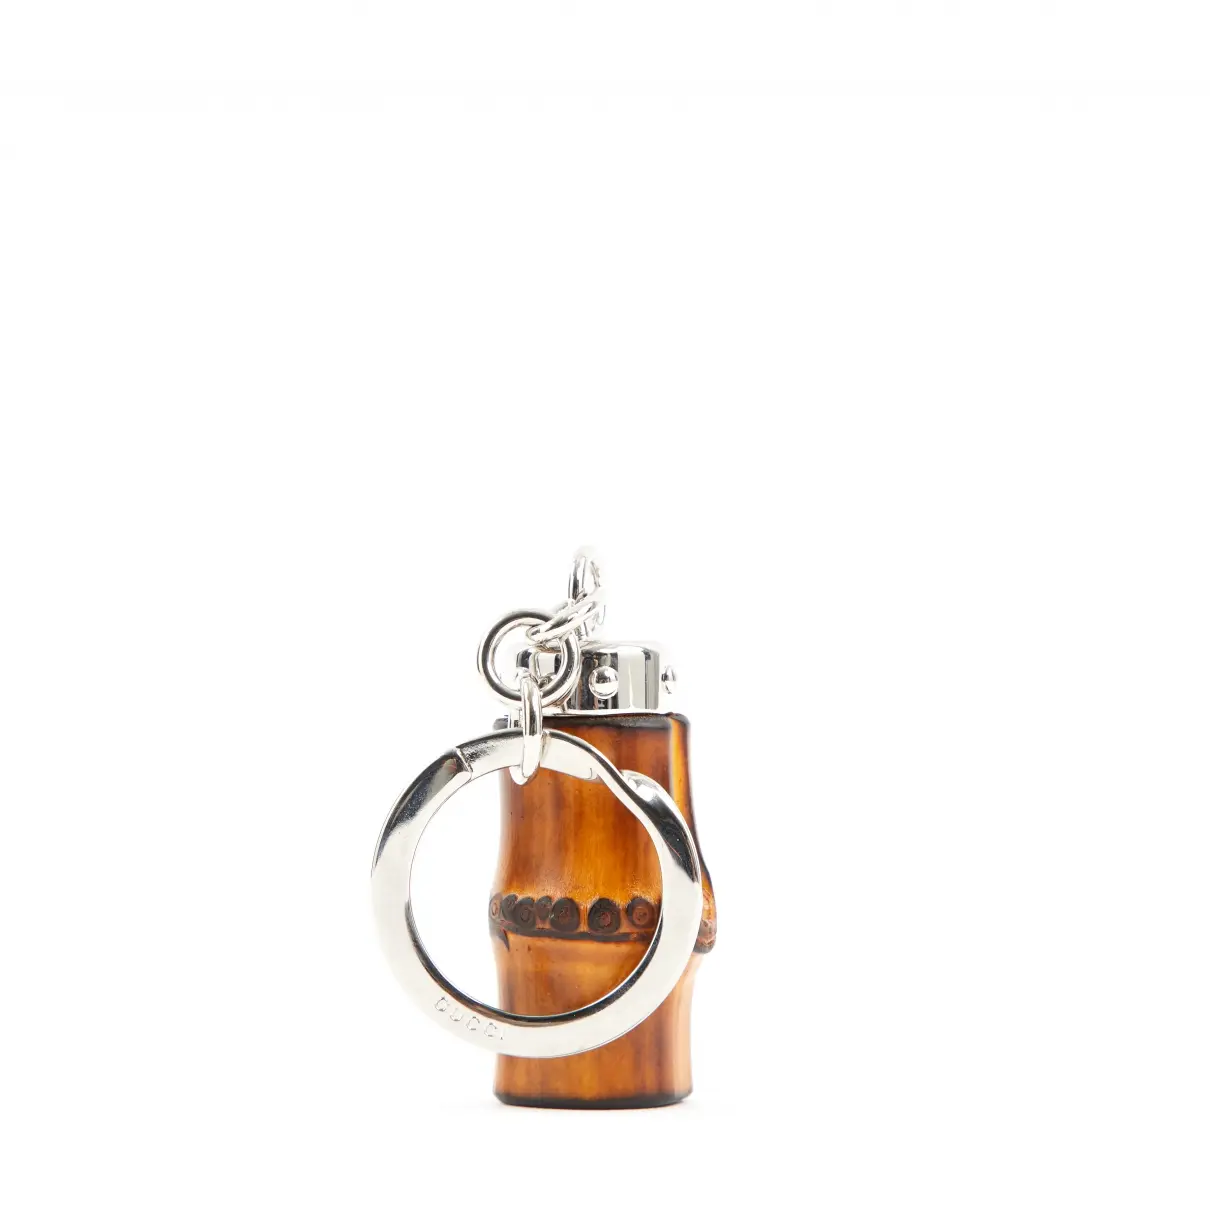 Gucci Bamboo bag charm for sale